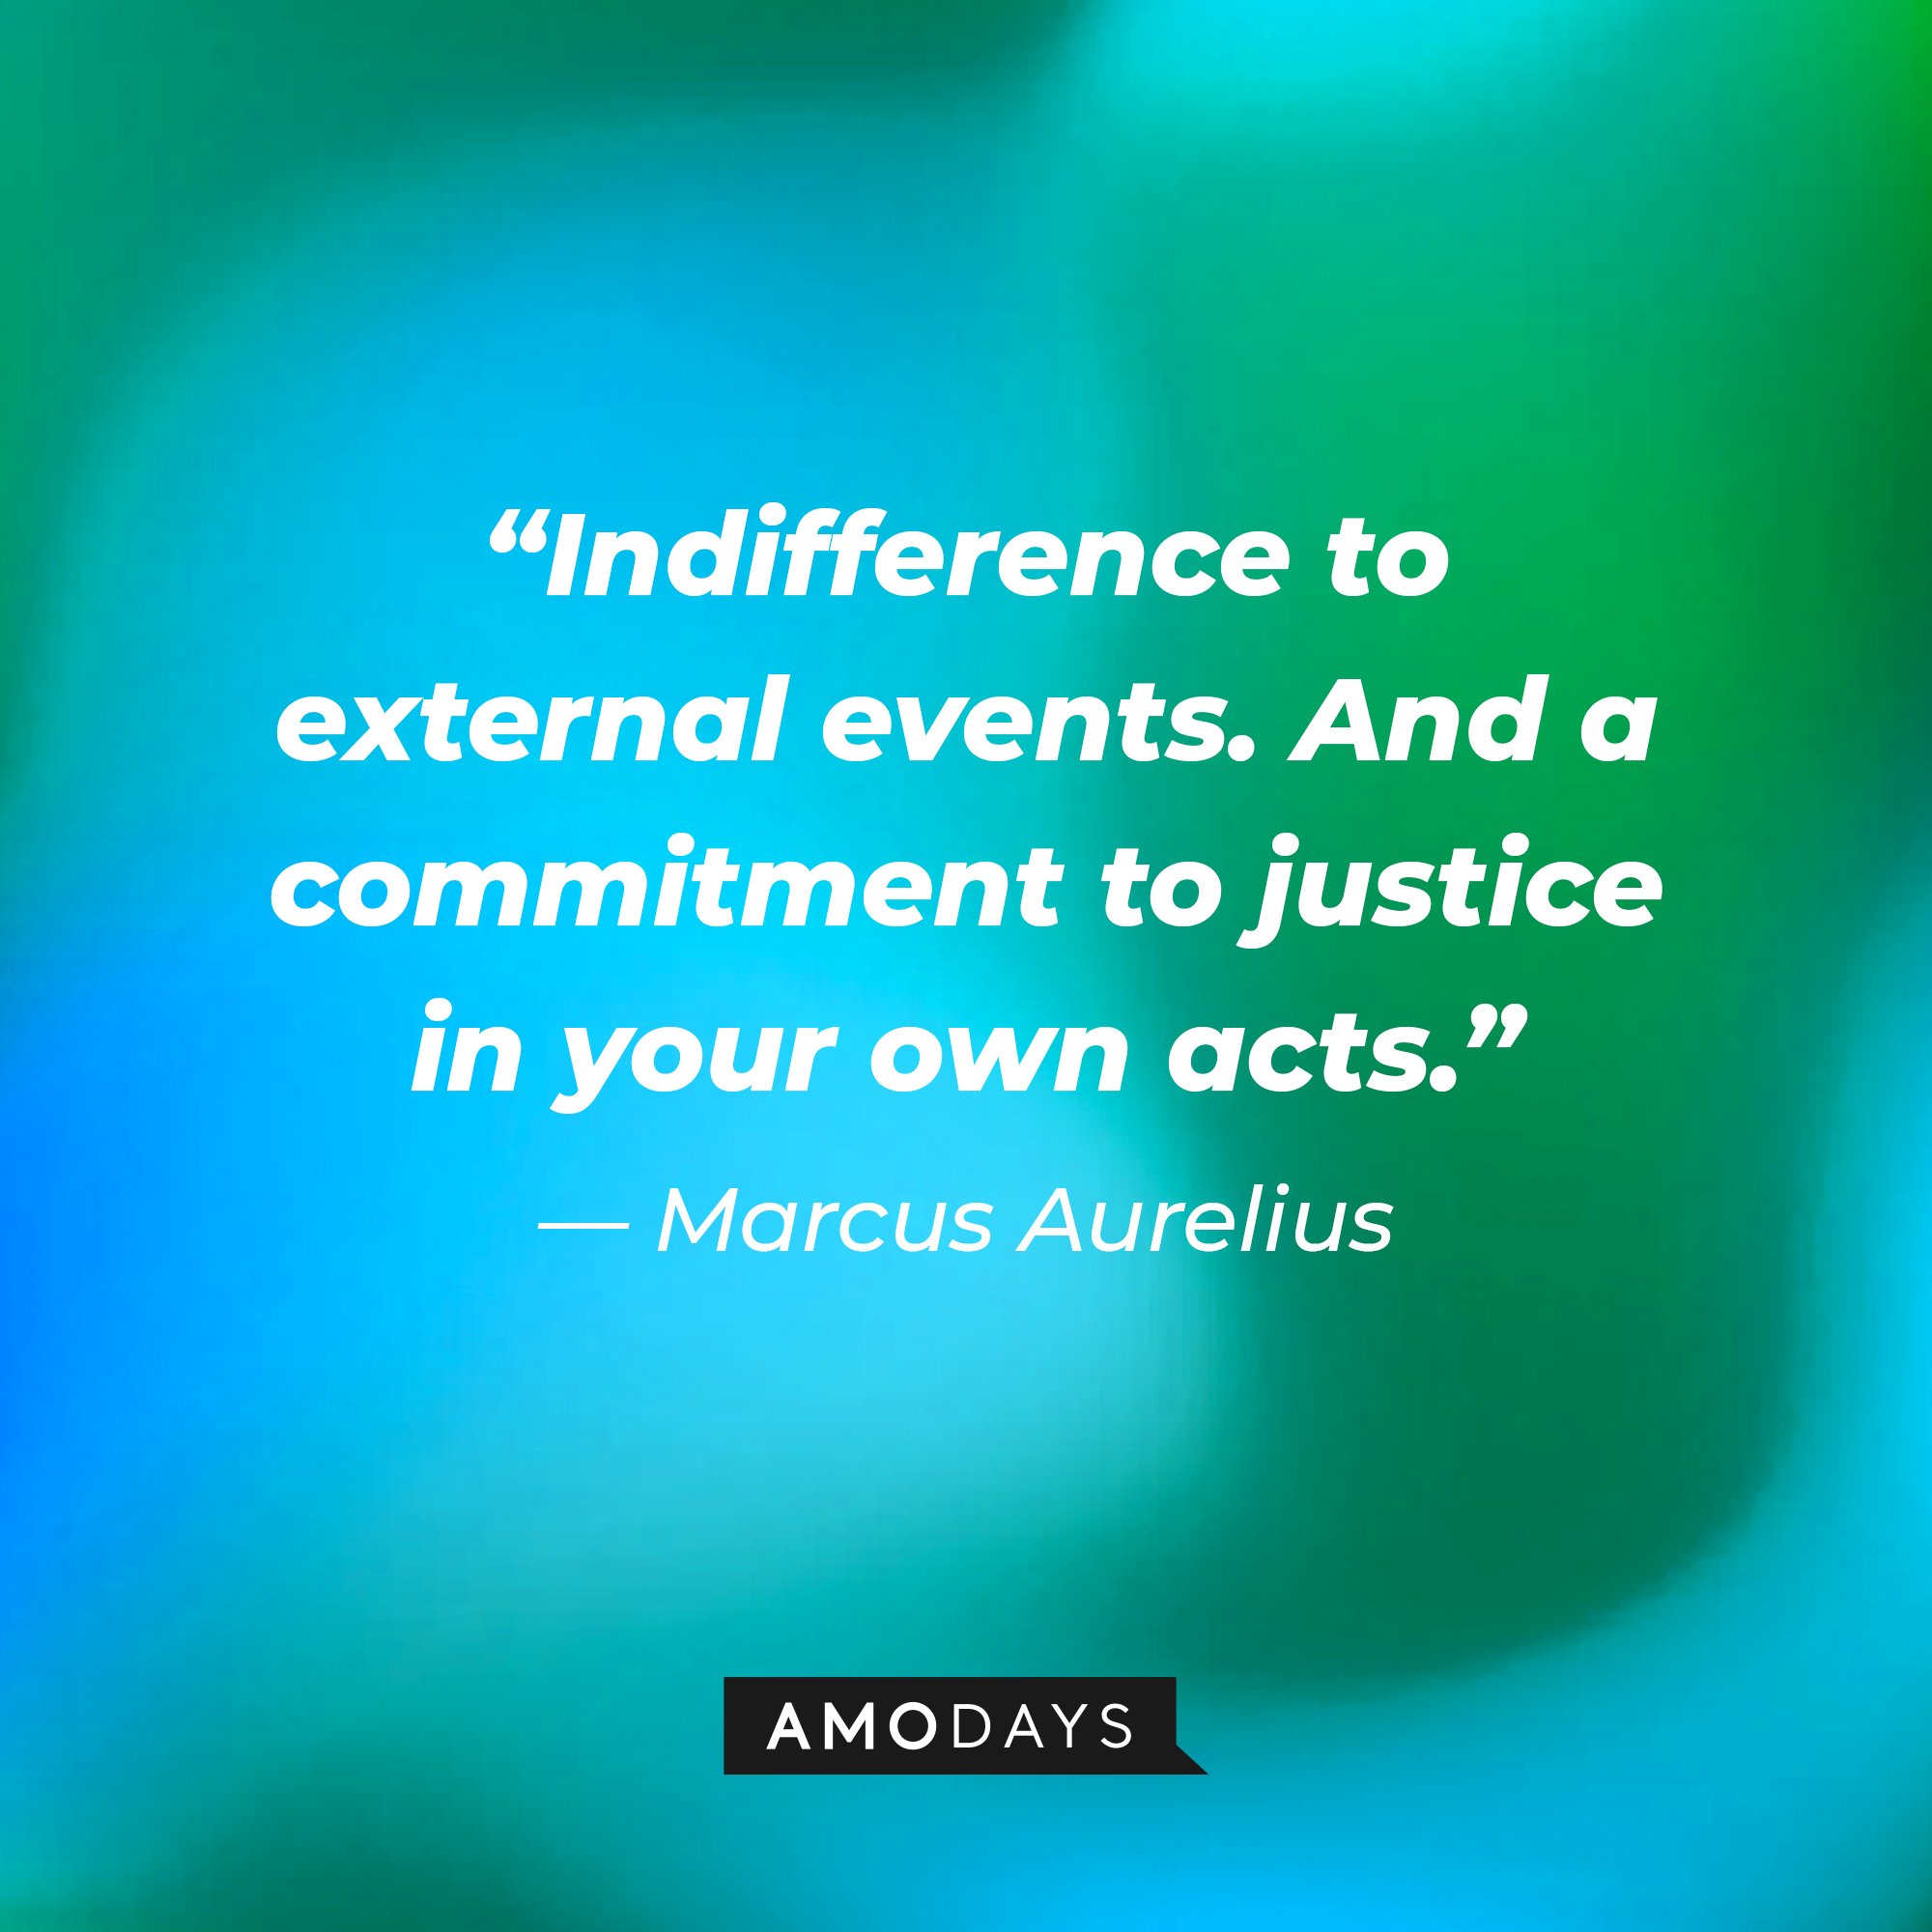 Marcus Aurelius's quote: “Indifference to external events. And a commitment to justice in your own acts.” | Image: AmoDays